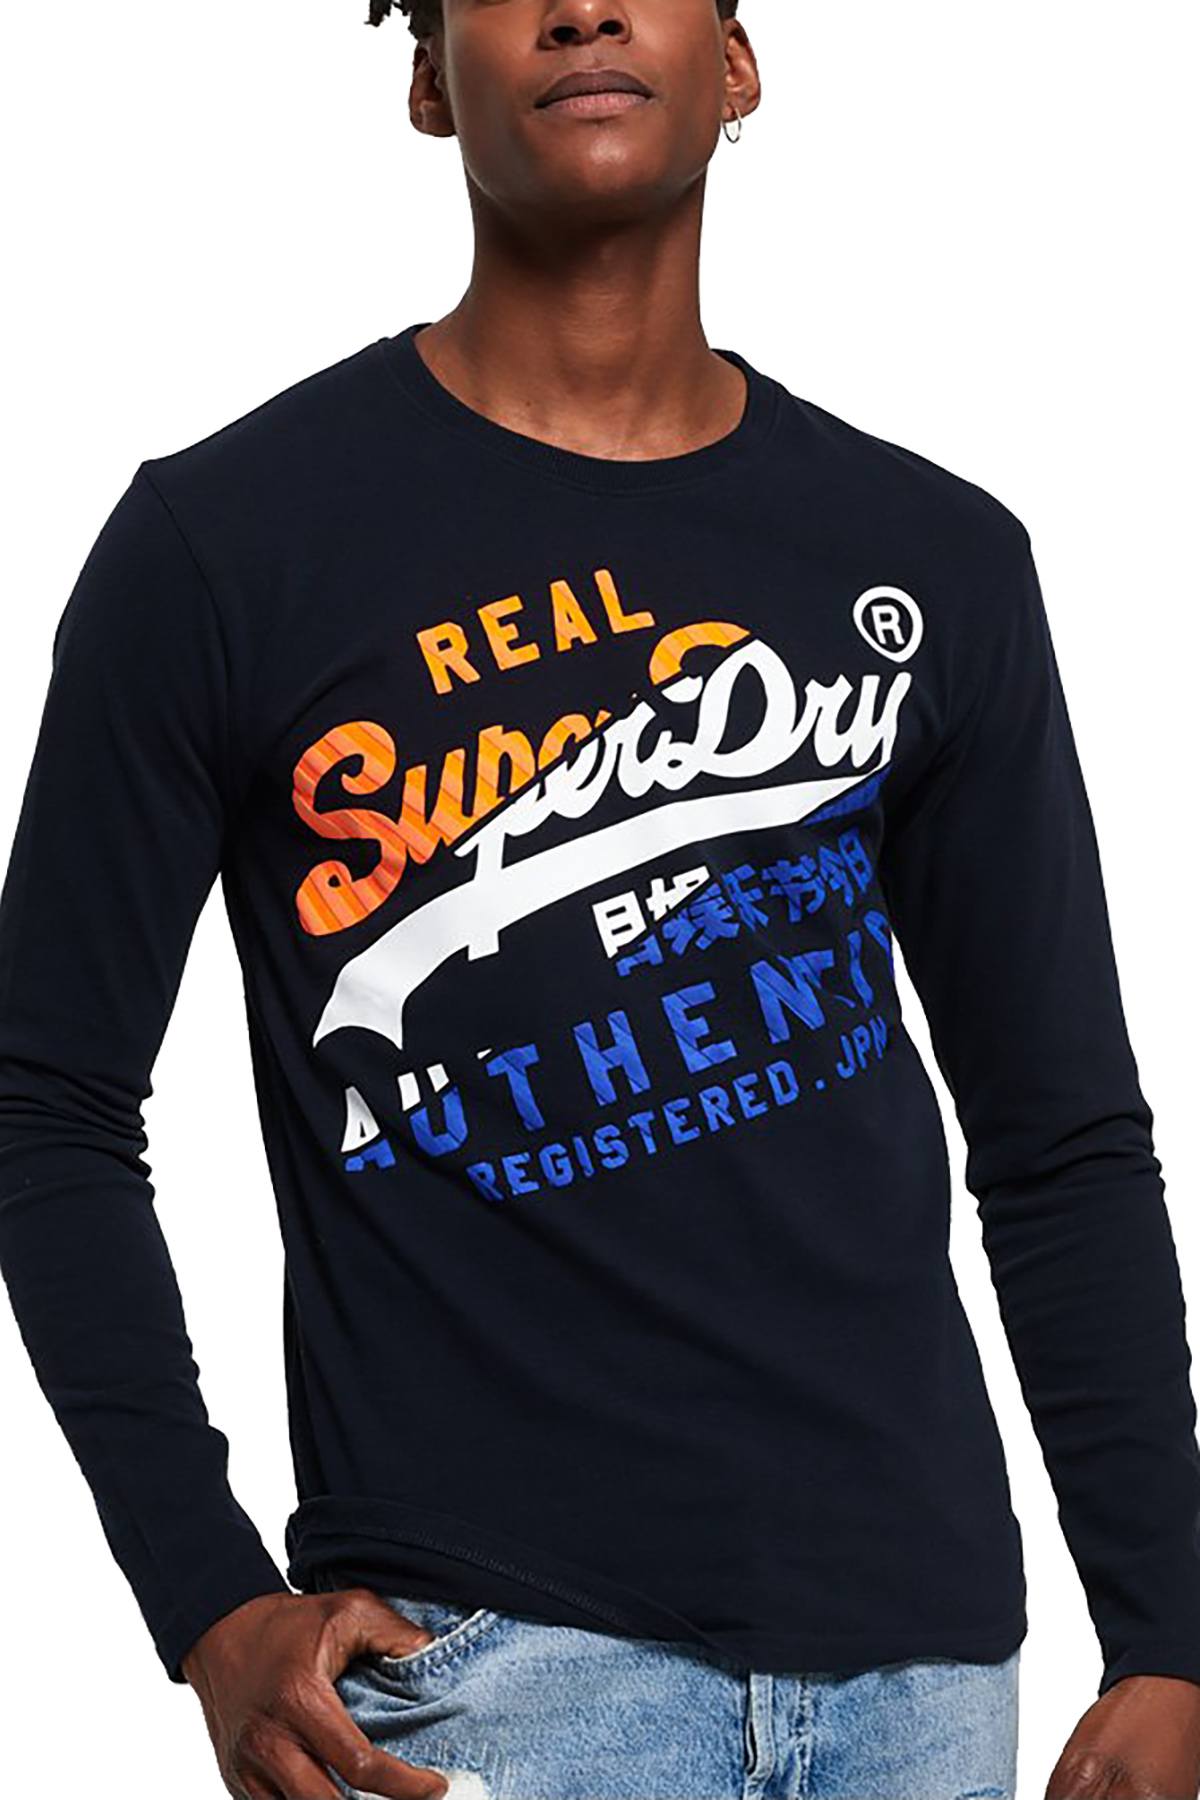 SuperDry Eclipse-Navy Vintage Authentic Long-Sleeve CheapUndies T-Shirt XL –